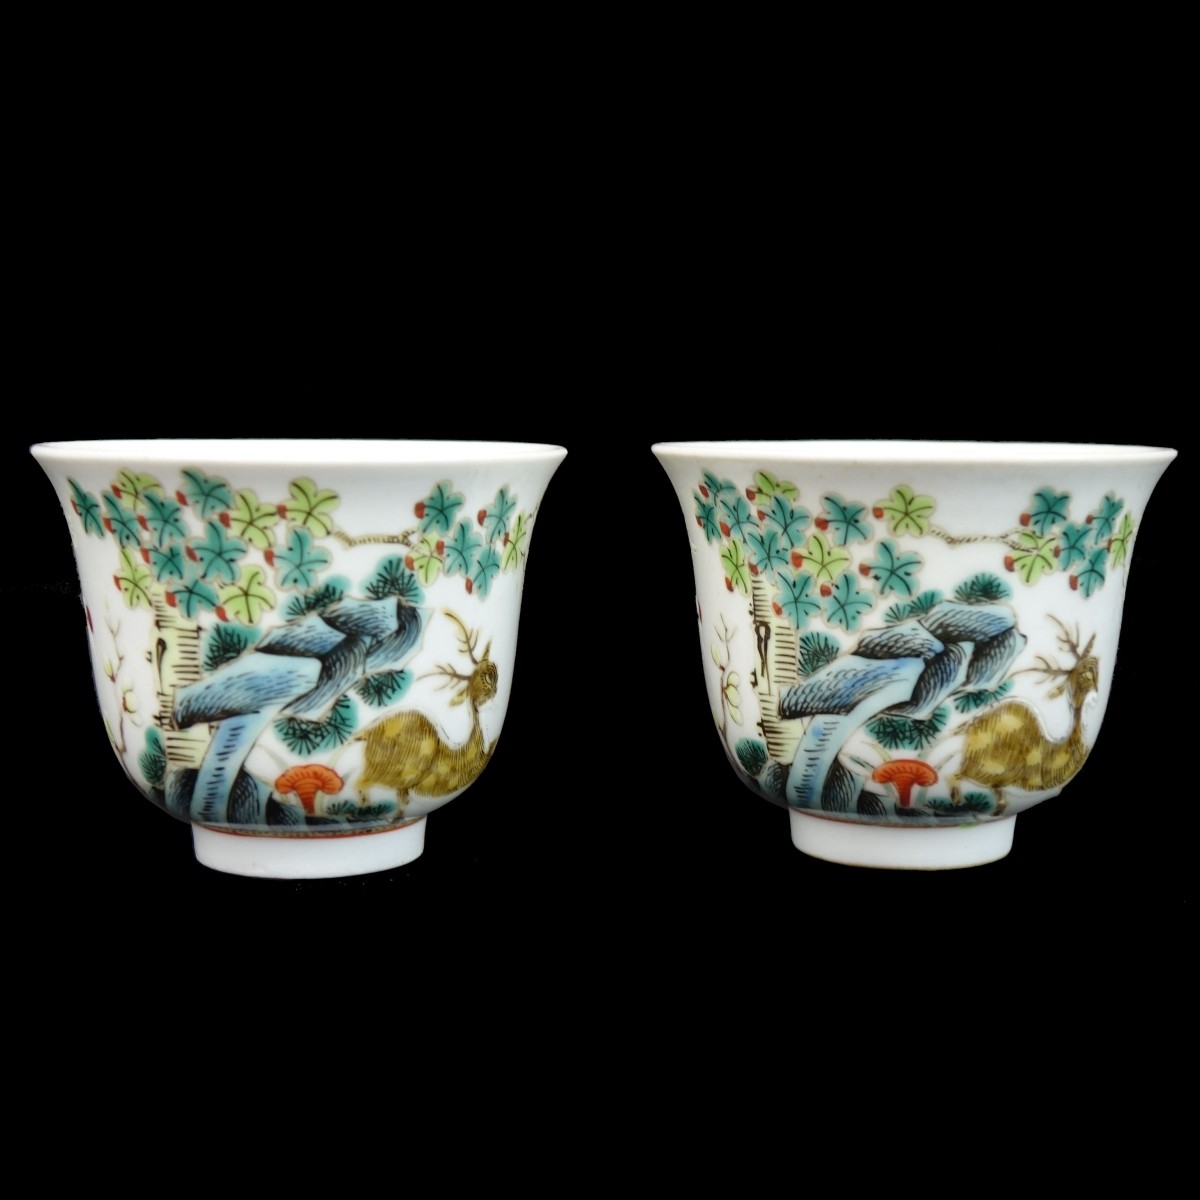 Chinese Porcelain Tea Cups